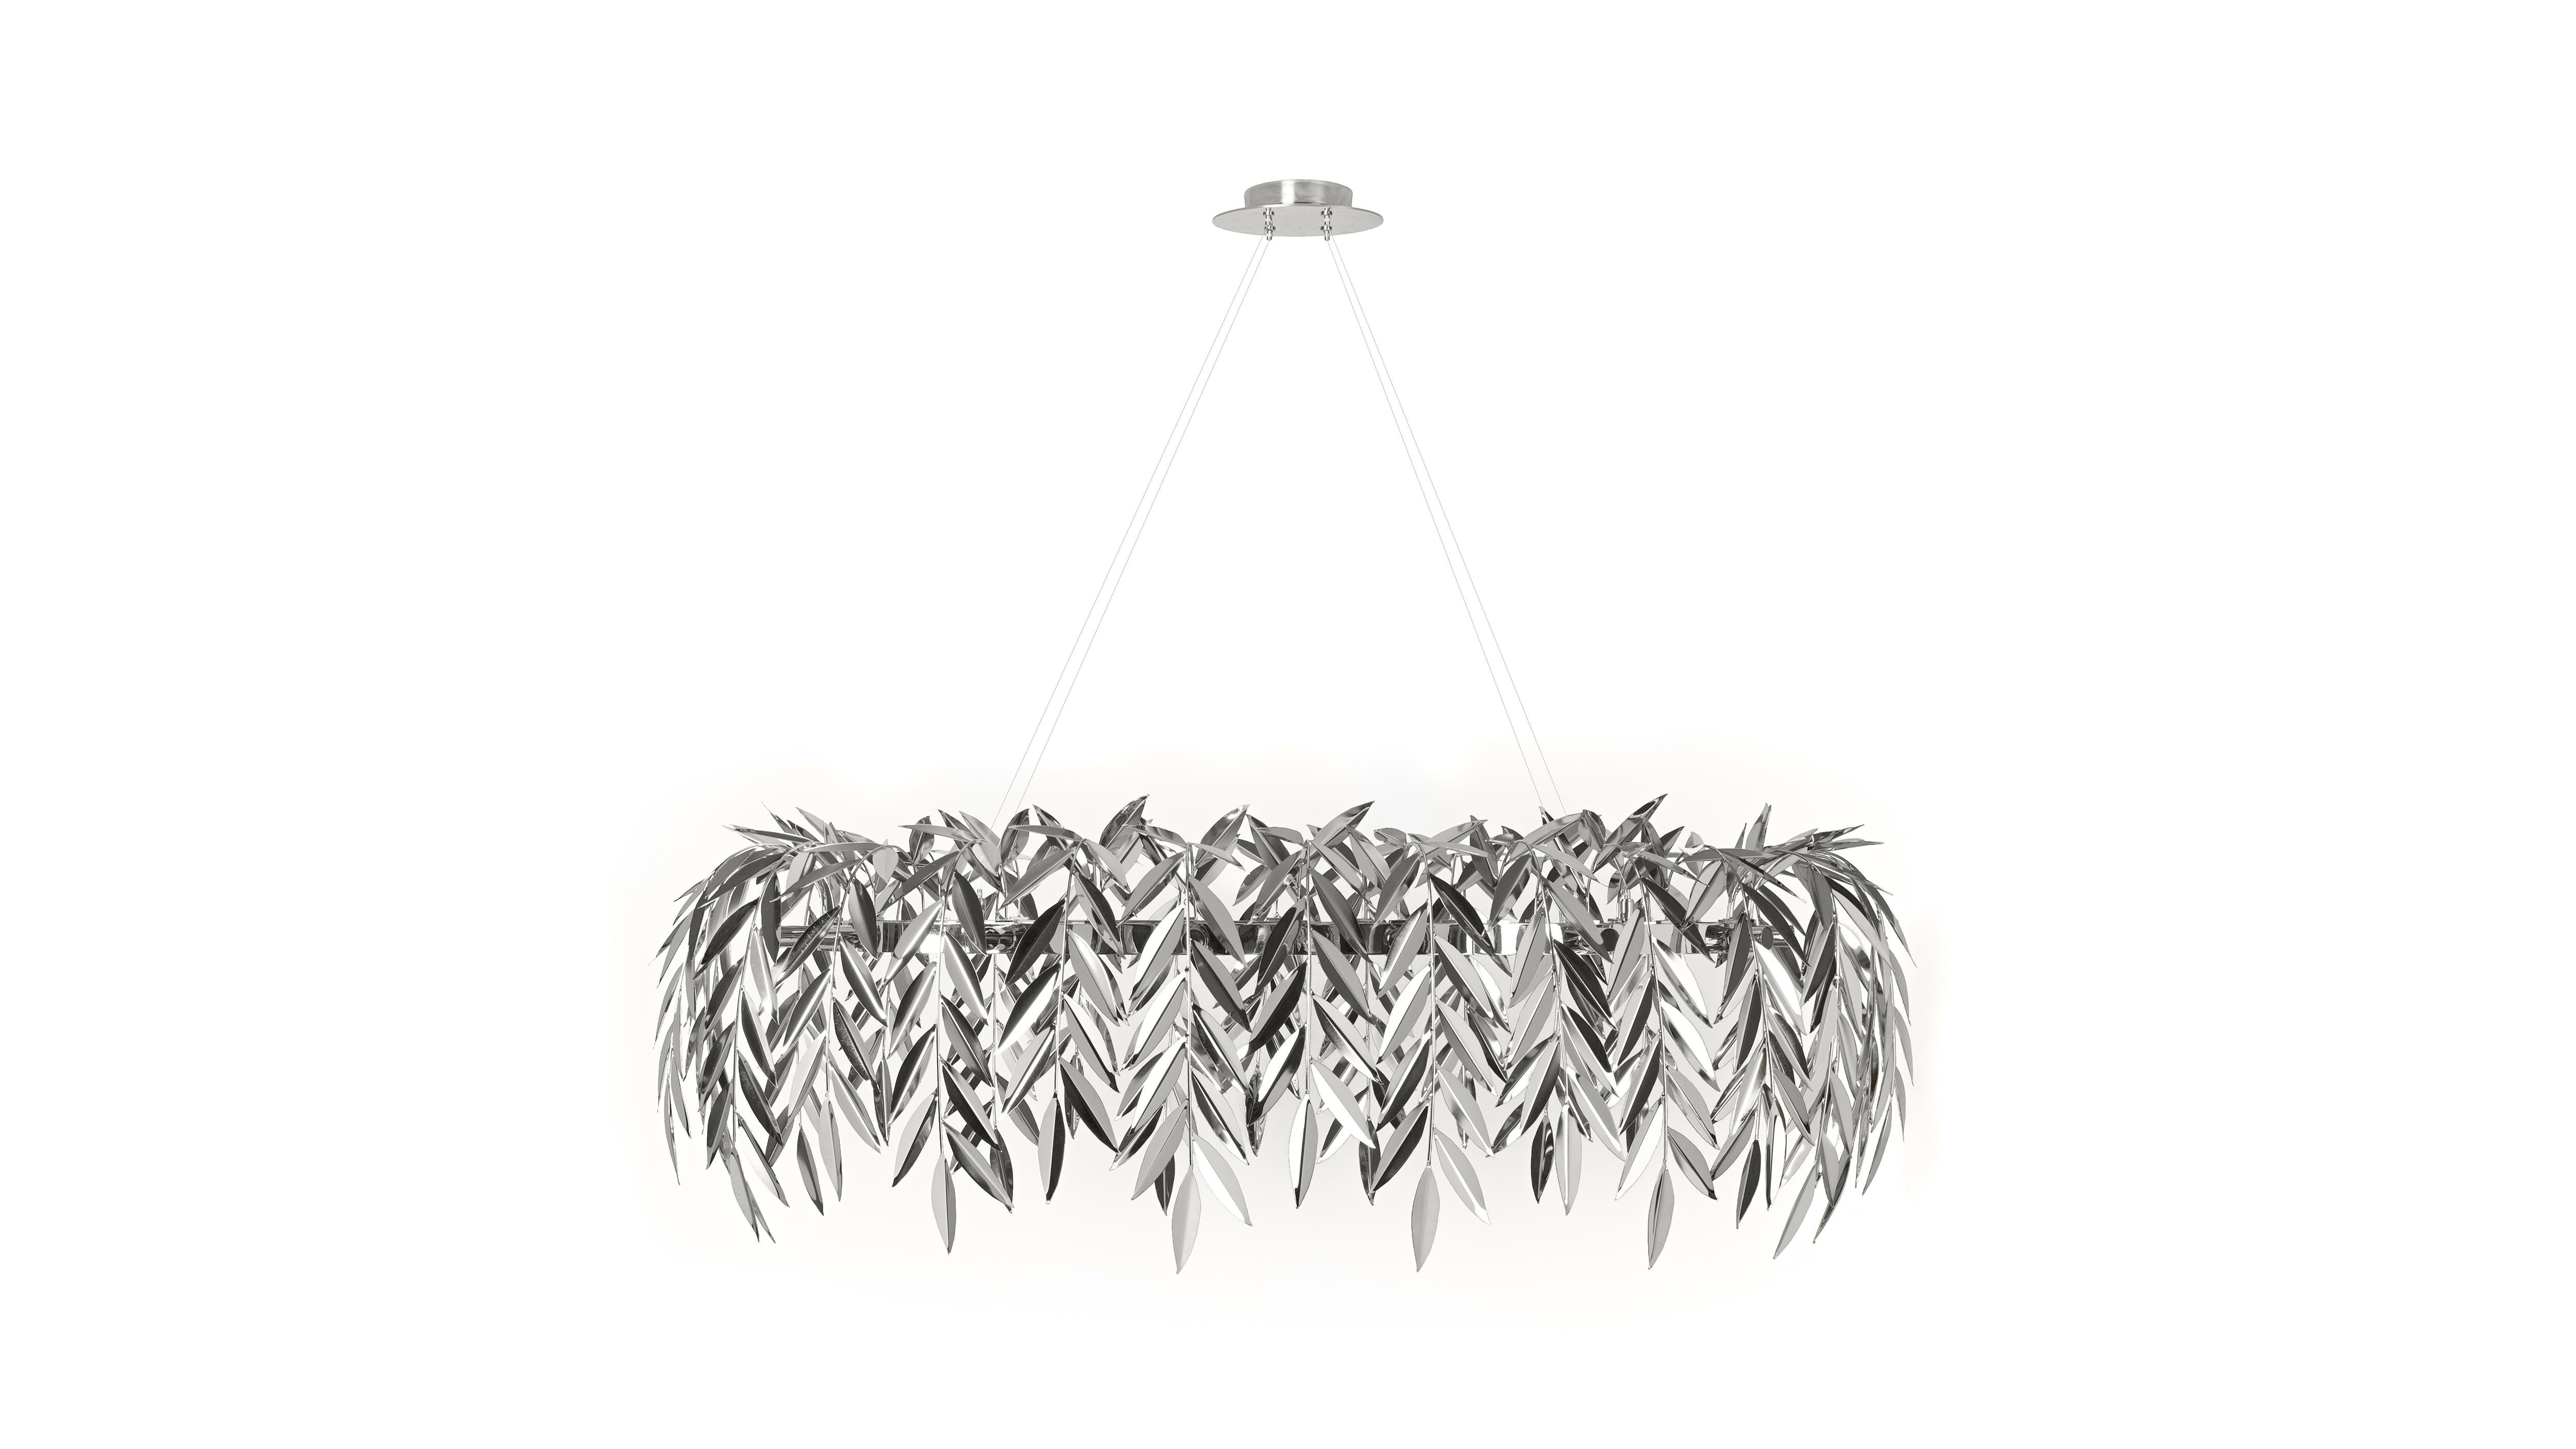 Nickel Azores Chandelier by InsidherLand
Dimensions: D 80 x W 130 x H 42 cm.
Materials: Polished nickel finish.
7 kg.

Born in the middle of the Atlantic Ocean, the archipelago of the Azores was formed by volcanic activity and belongs to the